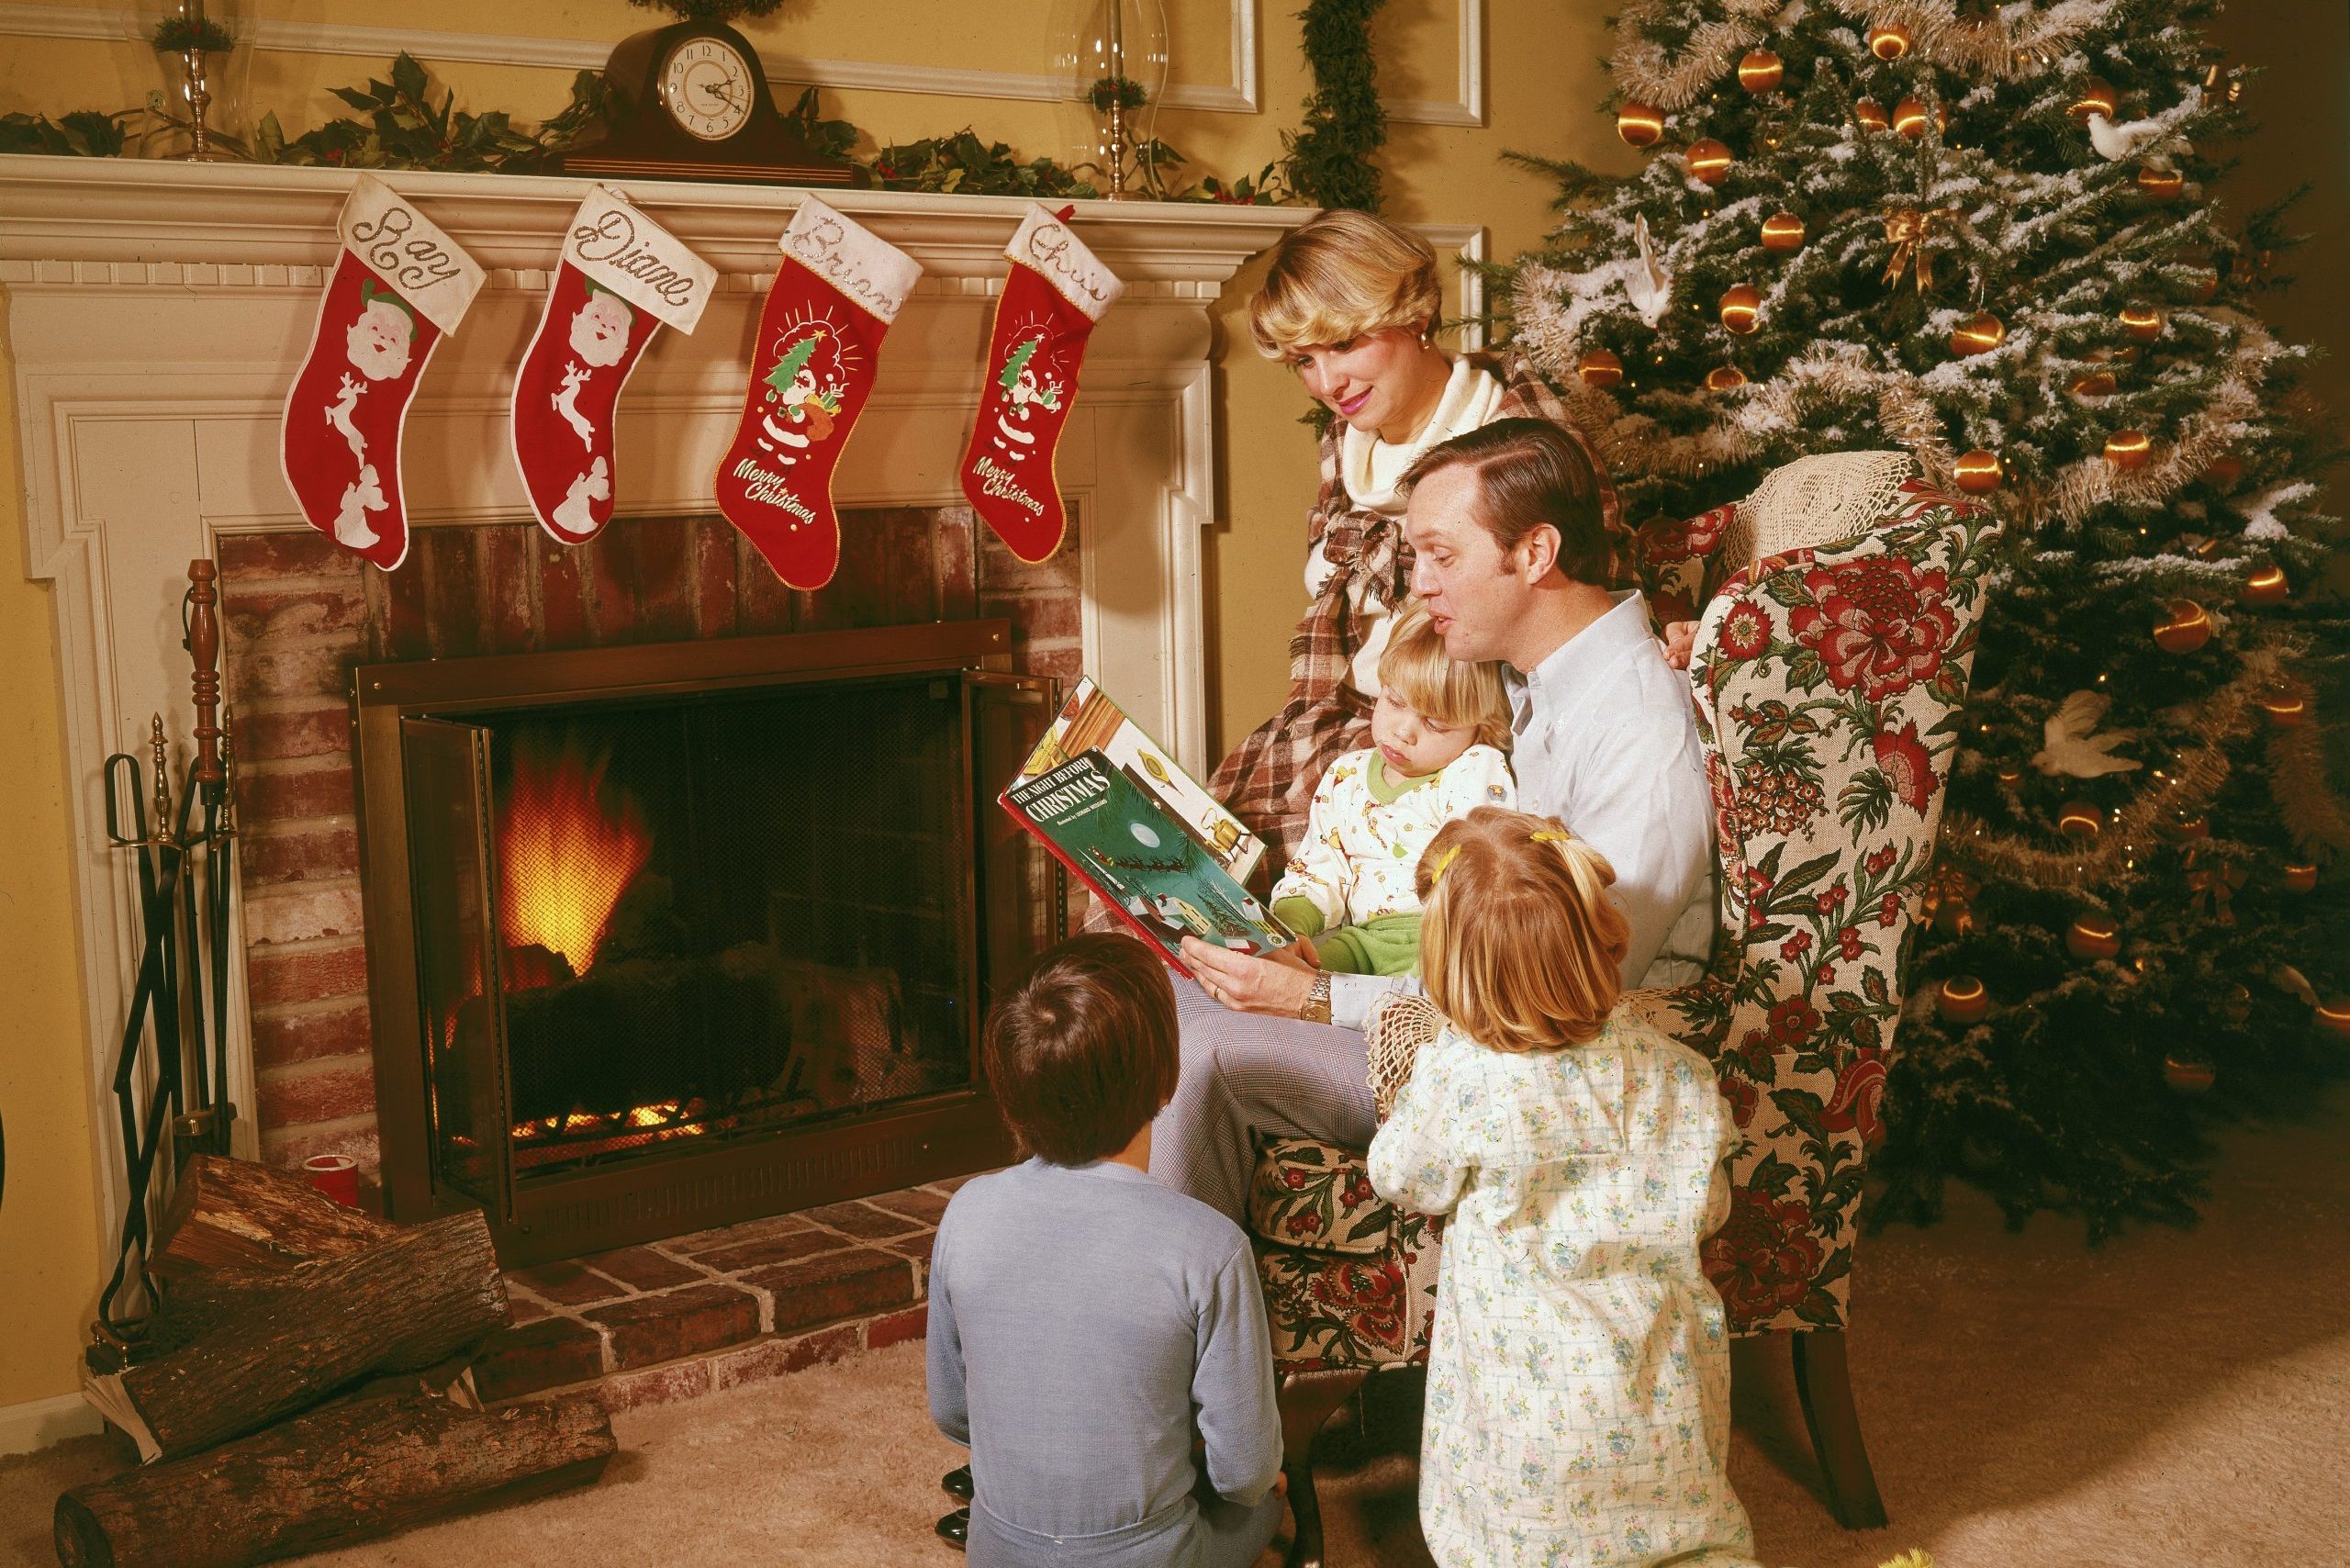 What Is Christmas? Your Guide to Christmas History, Traditions, and More